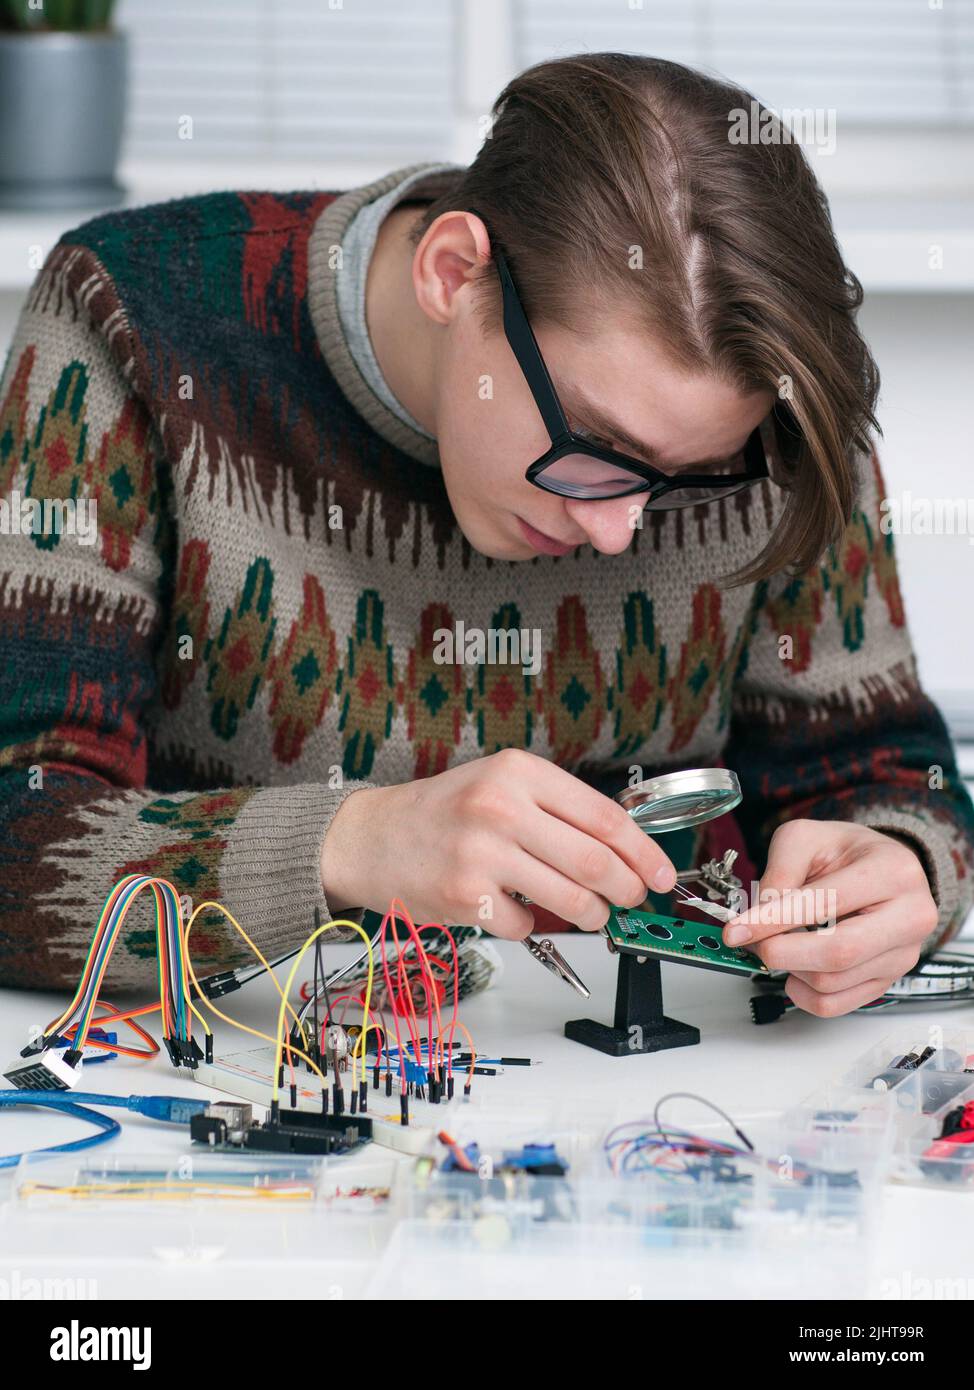 Young inventor examing electronic component Stock Photo